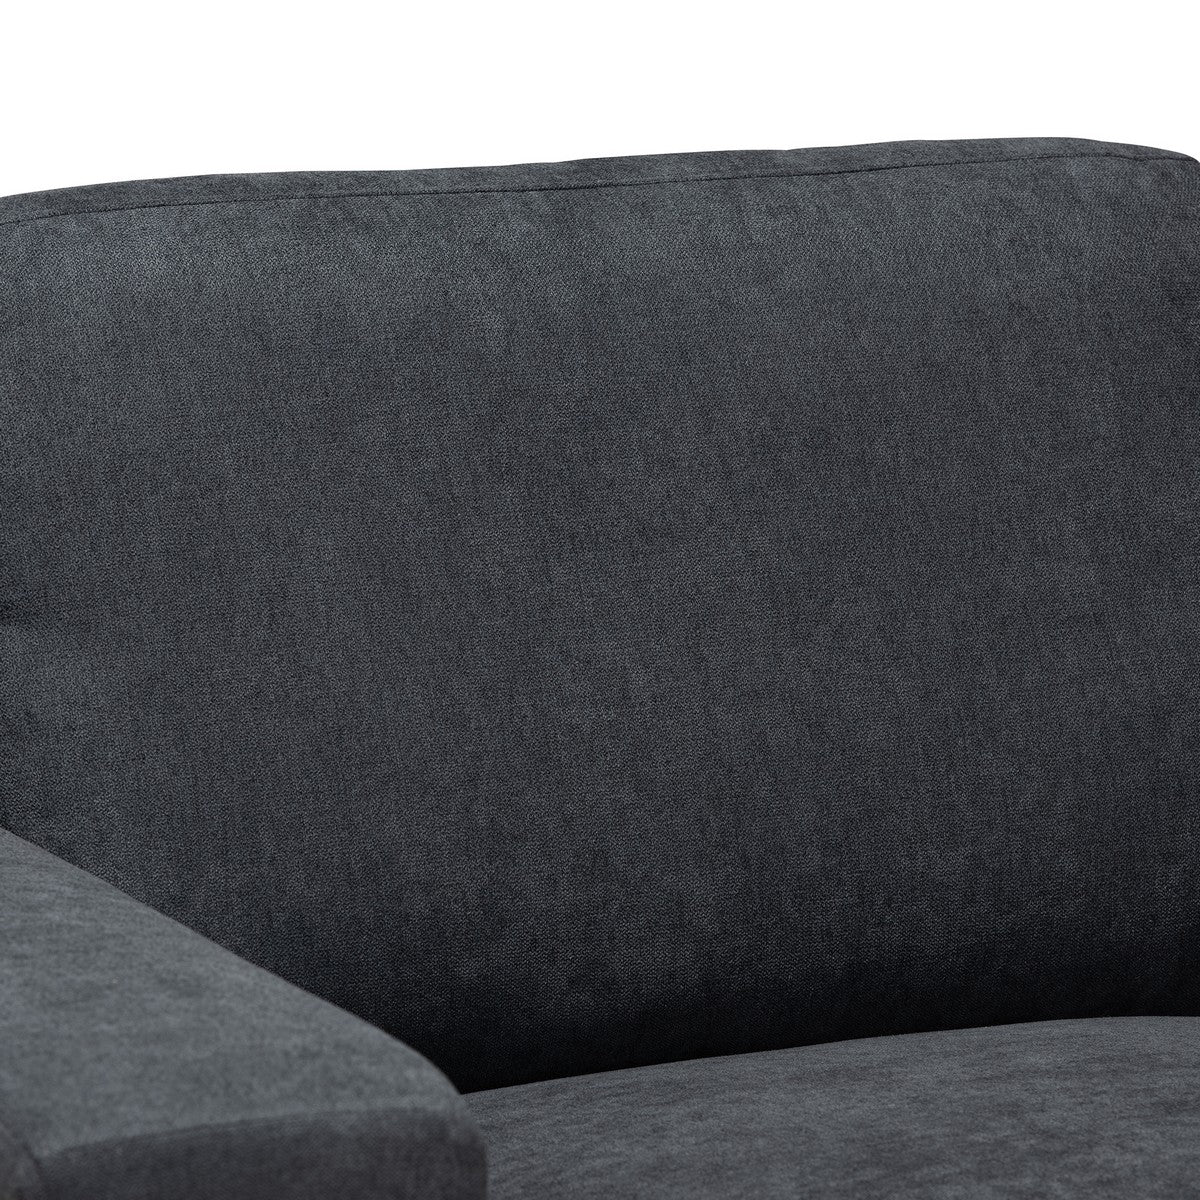 Baxton Studio Nevin Modern and Contemporary Dark Grey Fabric Upholstered Sectional Sofa with Right Facing Chaise